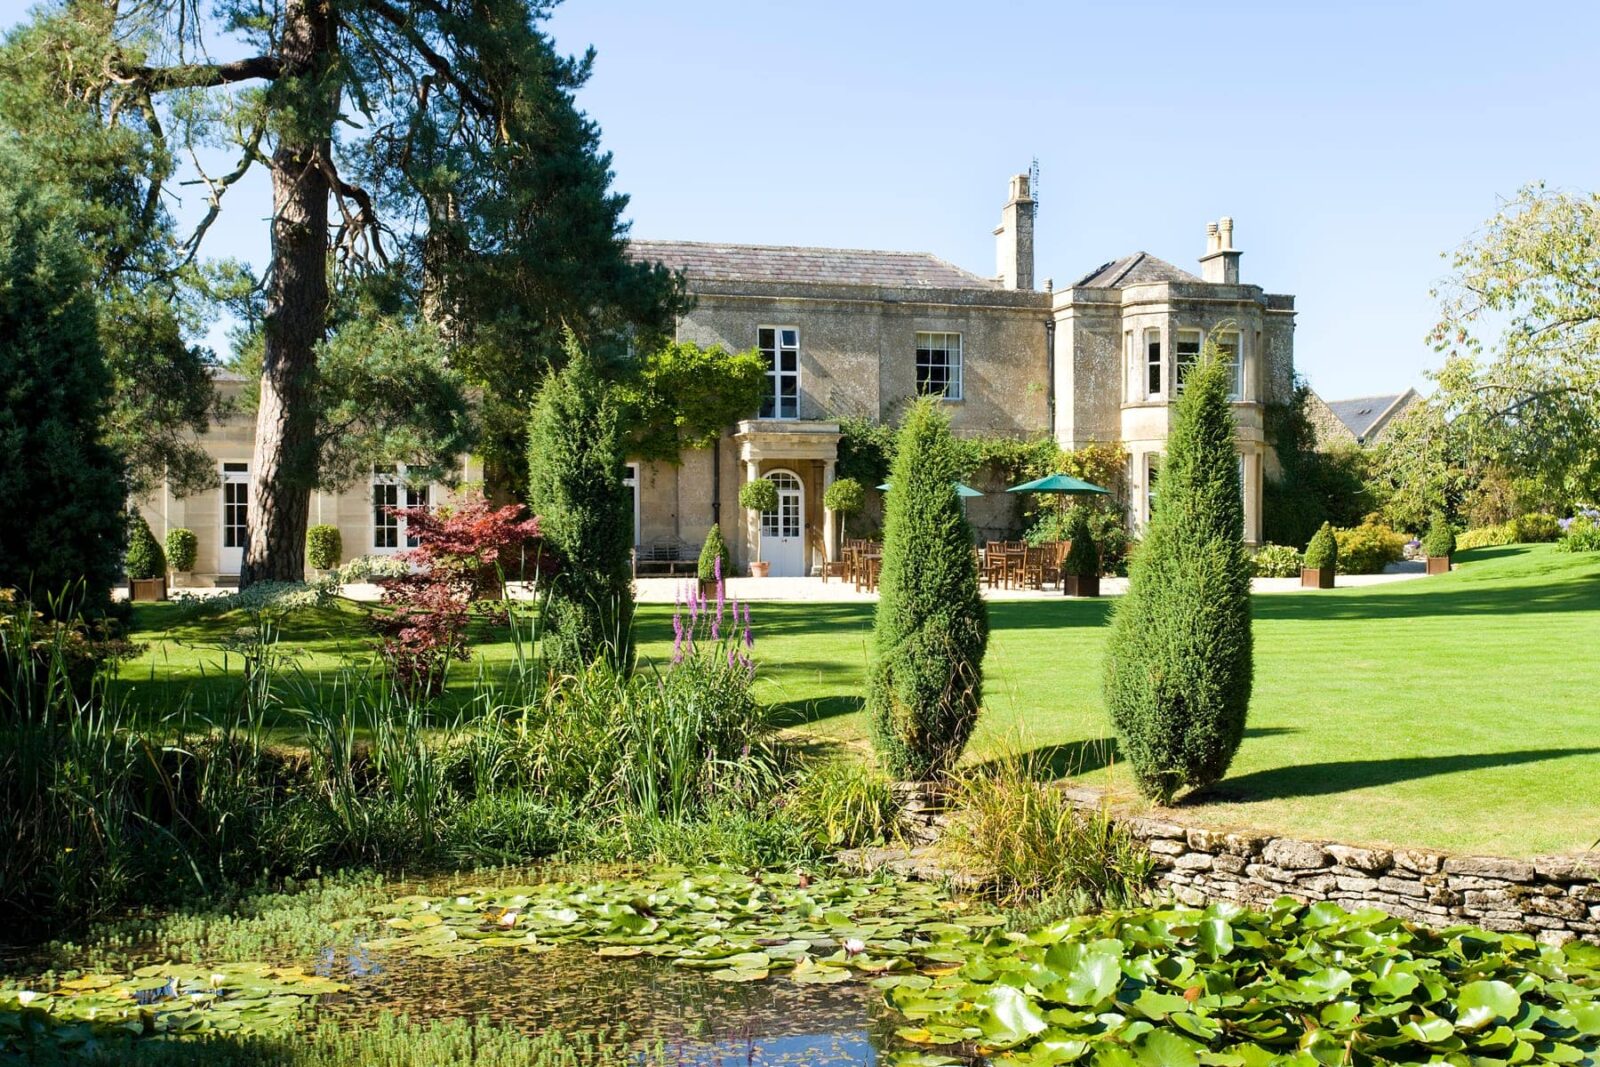 Pond, gardens, outdoor seating areas and main country house at Guyers House Hotel & Restaurant